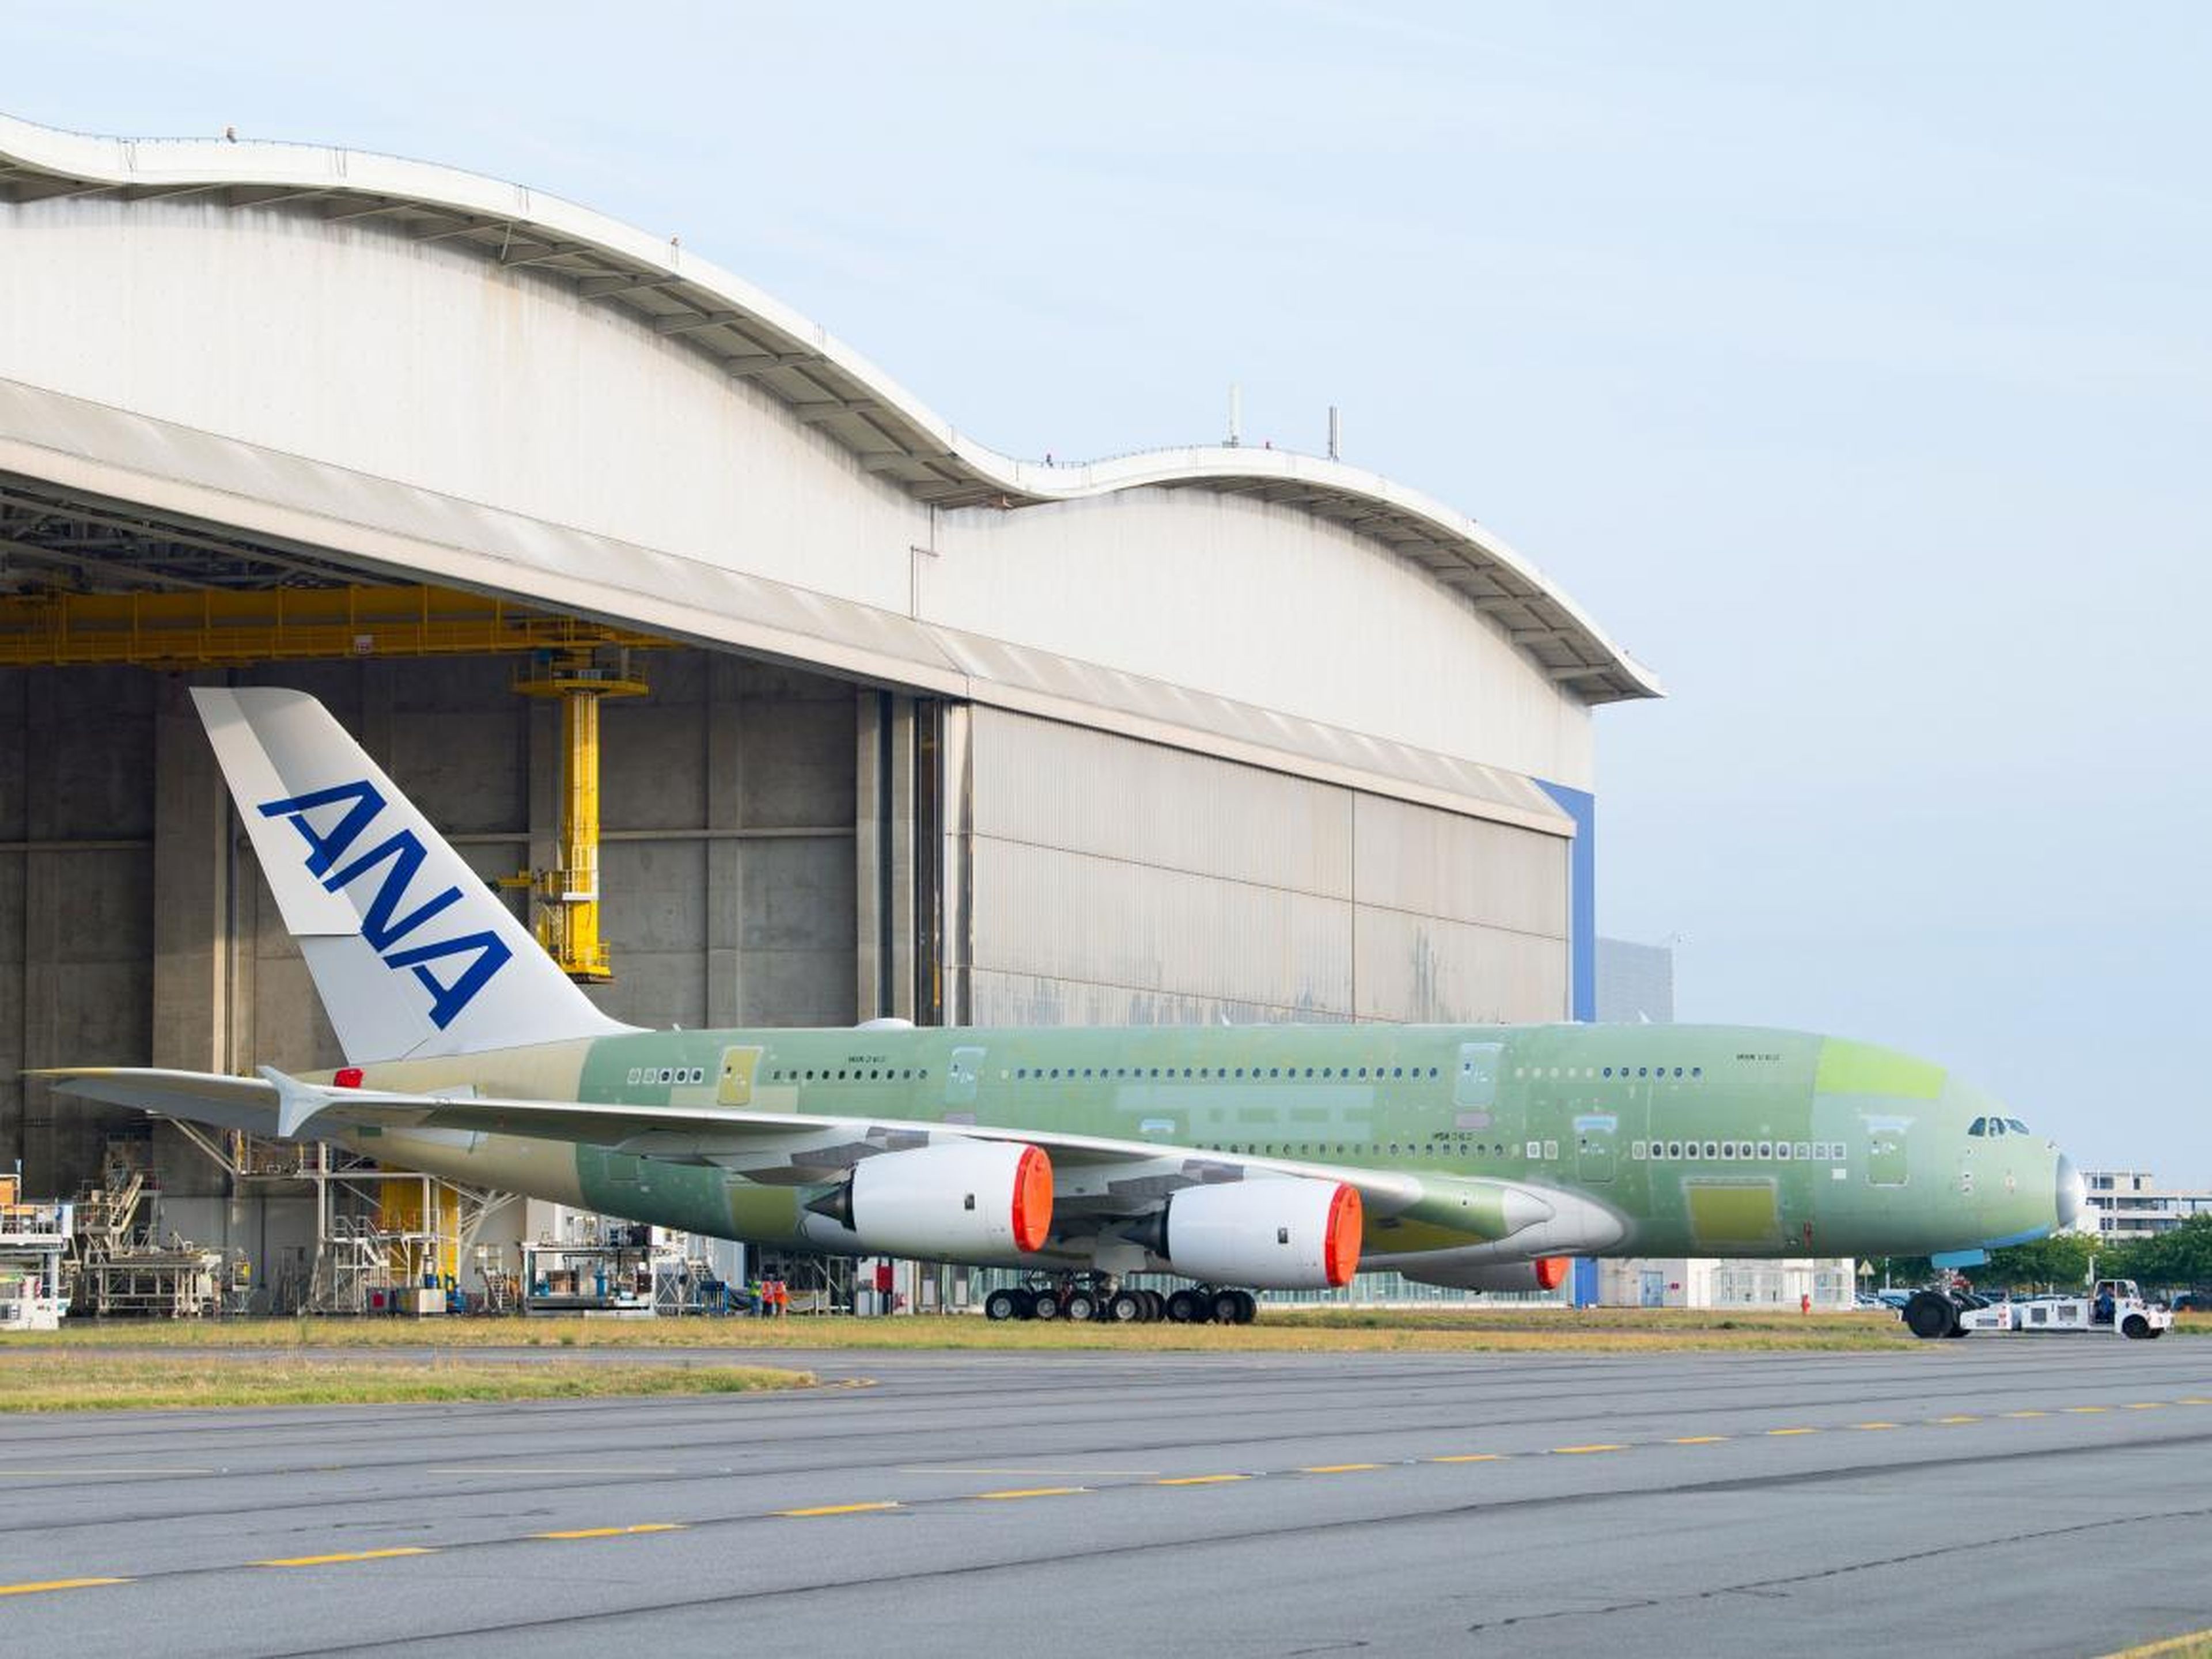 Japan's All Nippon Airways will soon begin commercial service with its first A380.